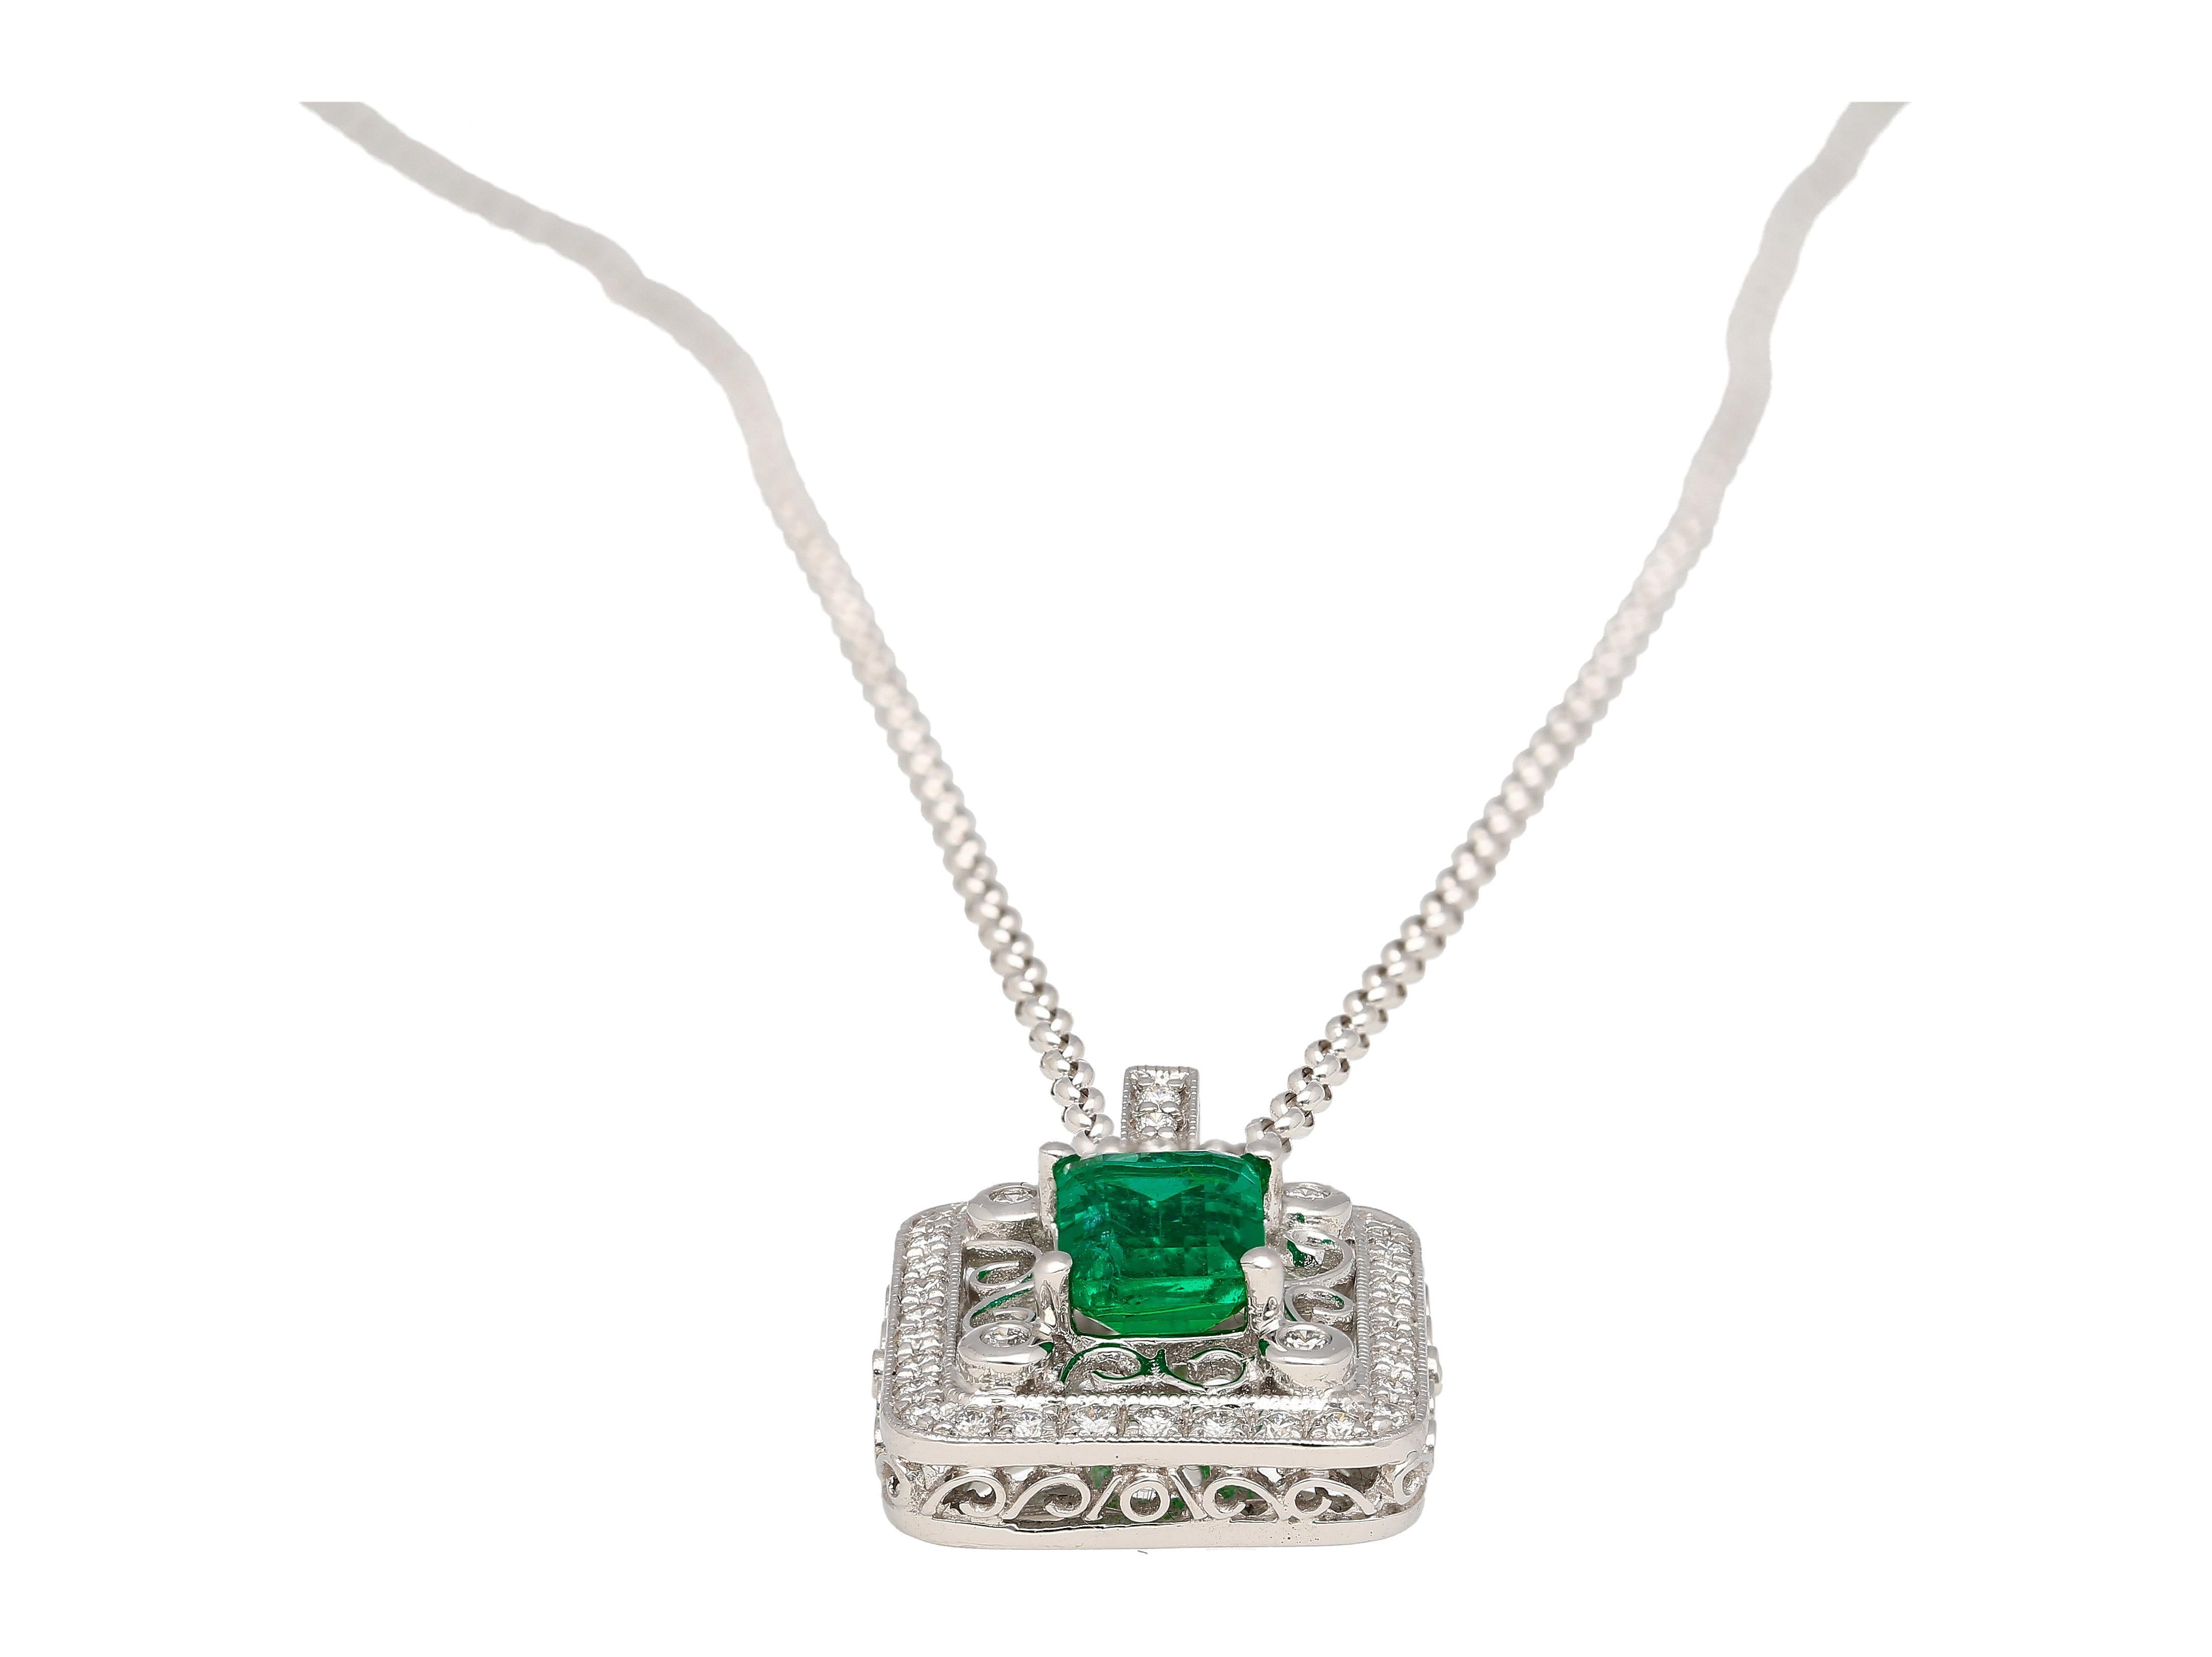 GIA Certified 1.39 Carat Zambian Emerald and Diamond Floral Box Pendant Necklace For Sale 1